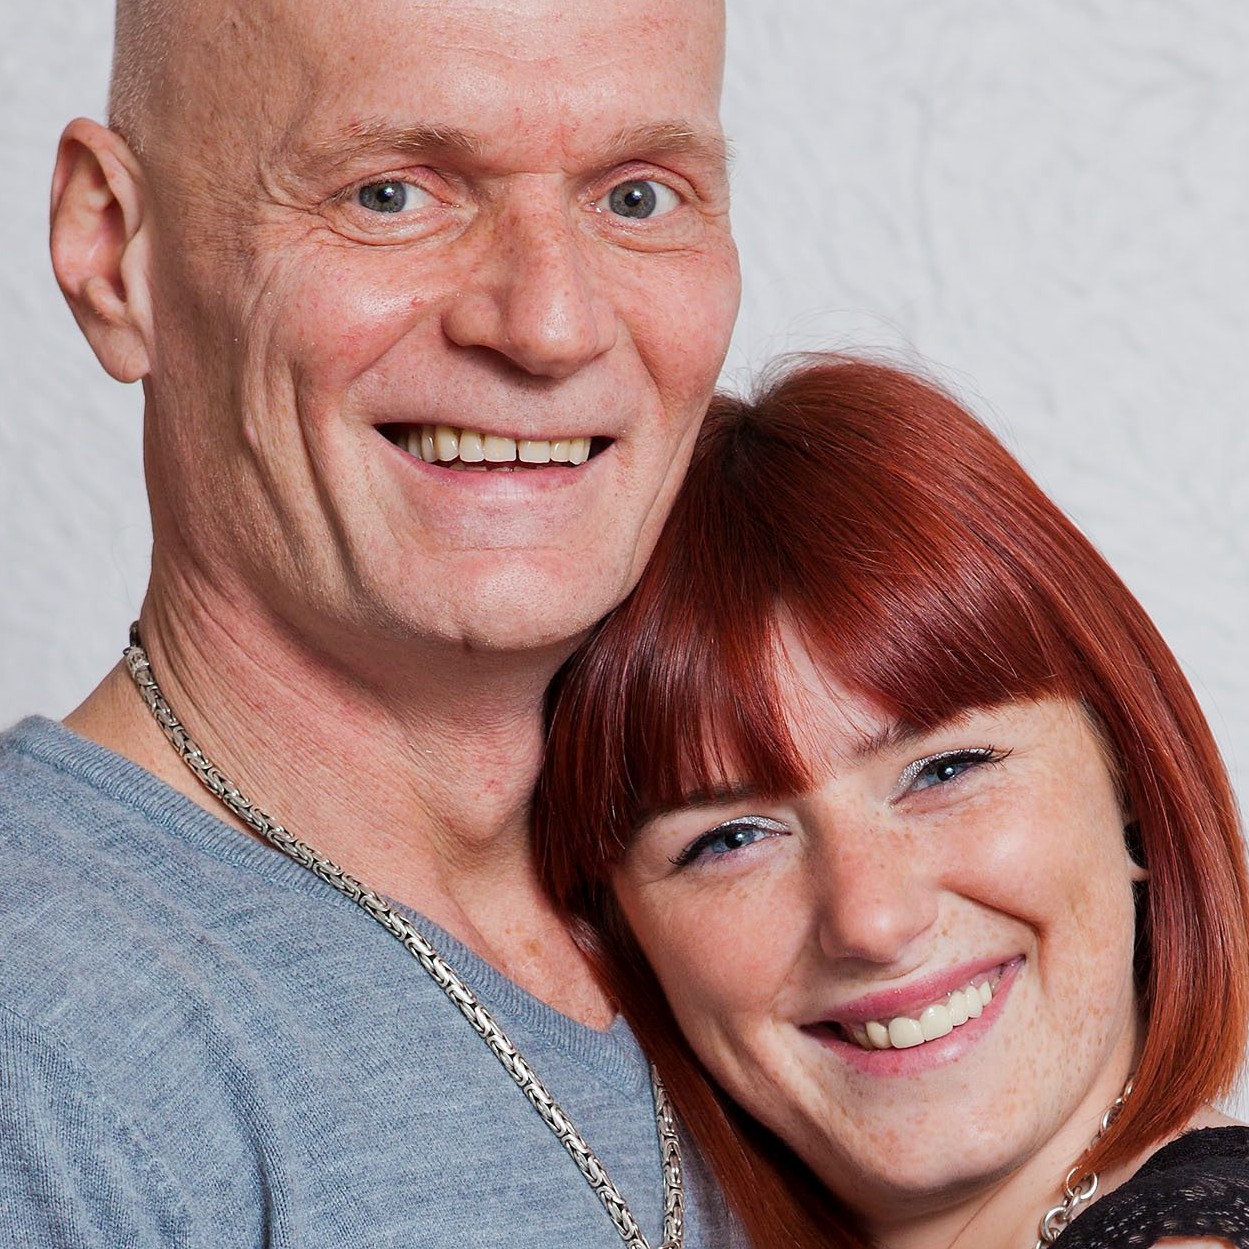 Nick yarris with his wife